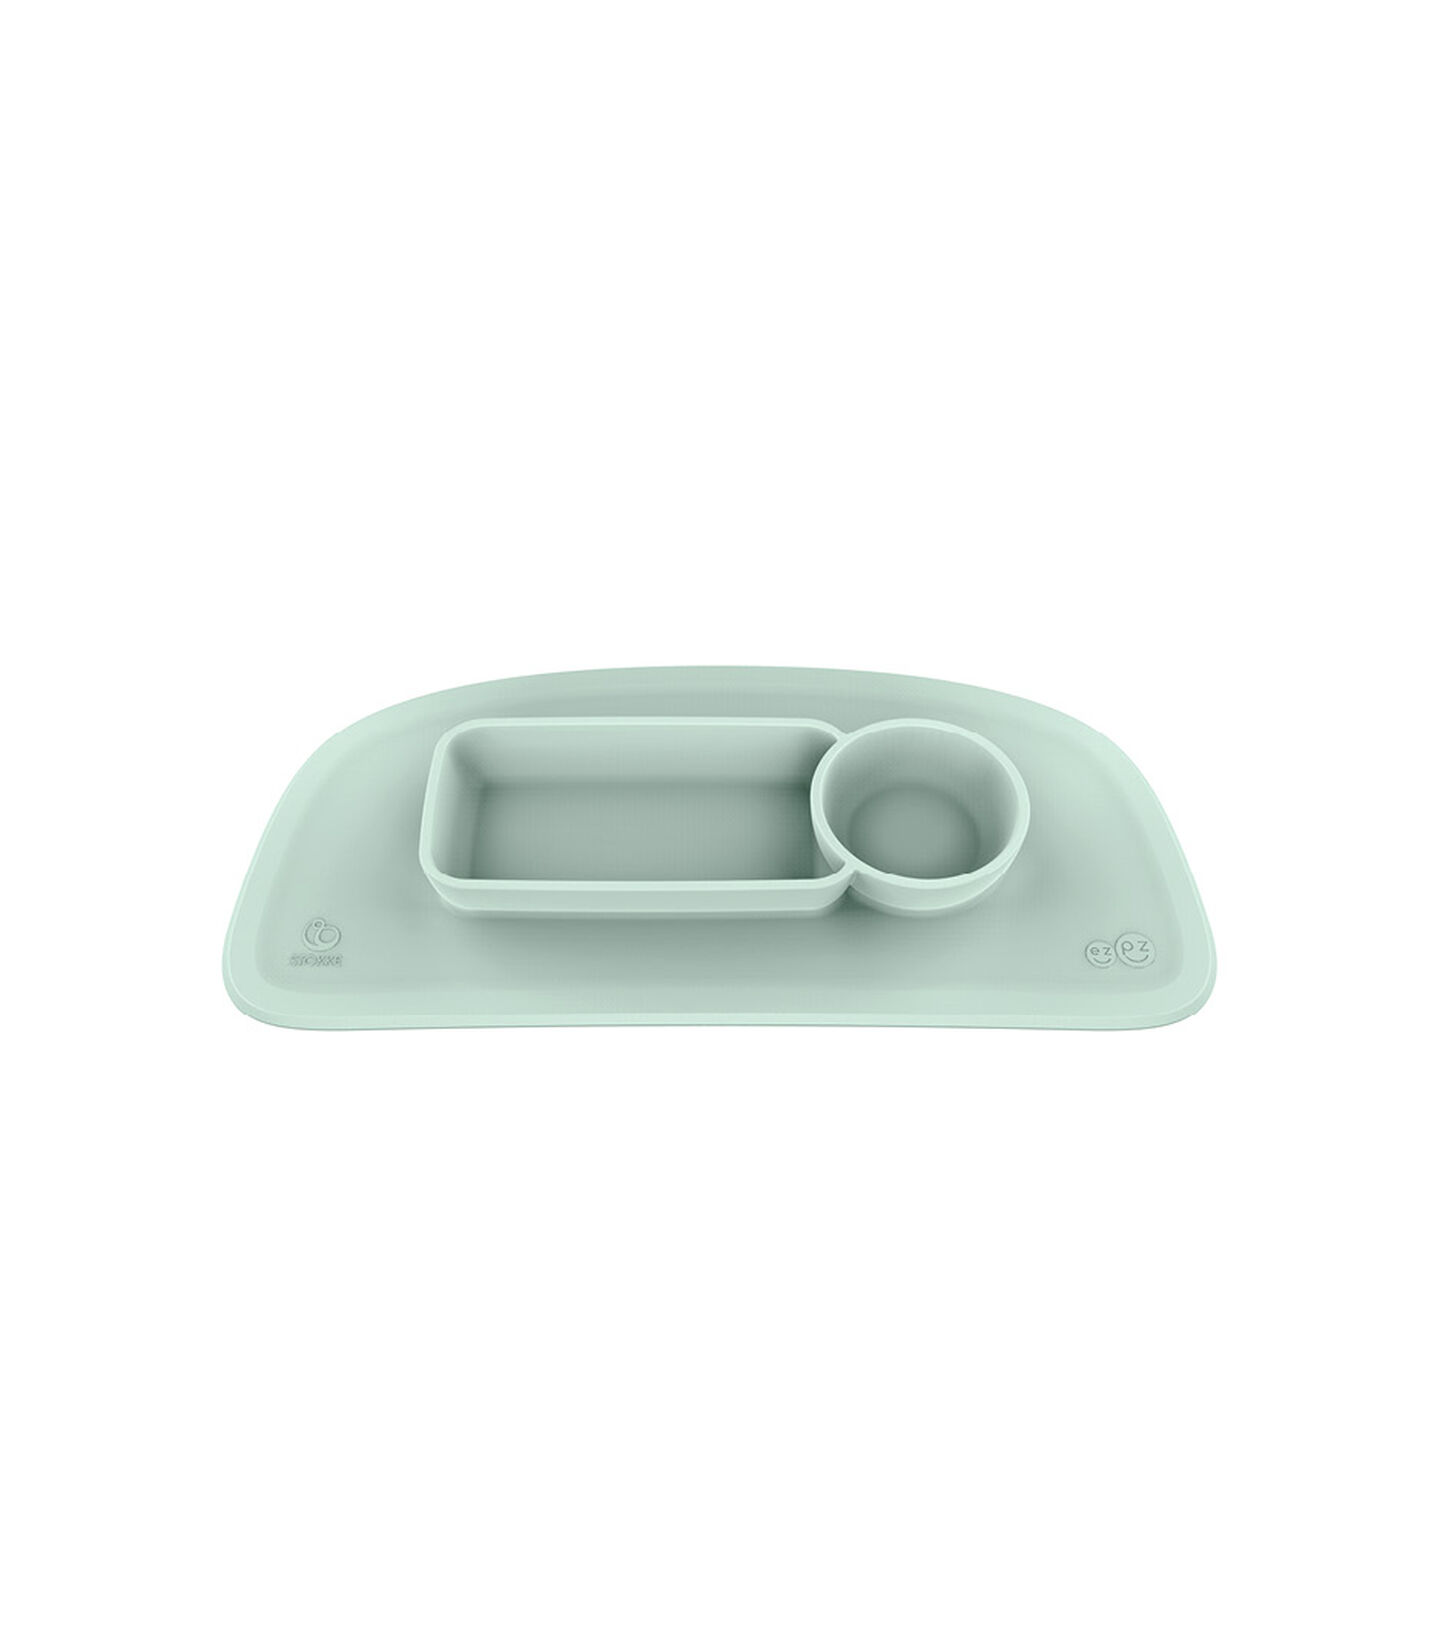 ezpz™ by Stokke™ placemat for Stokke® Tray Soft Mint, Мятно-зелёный, mainview view 1